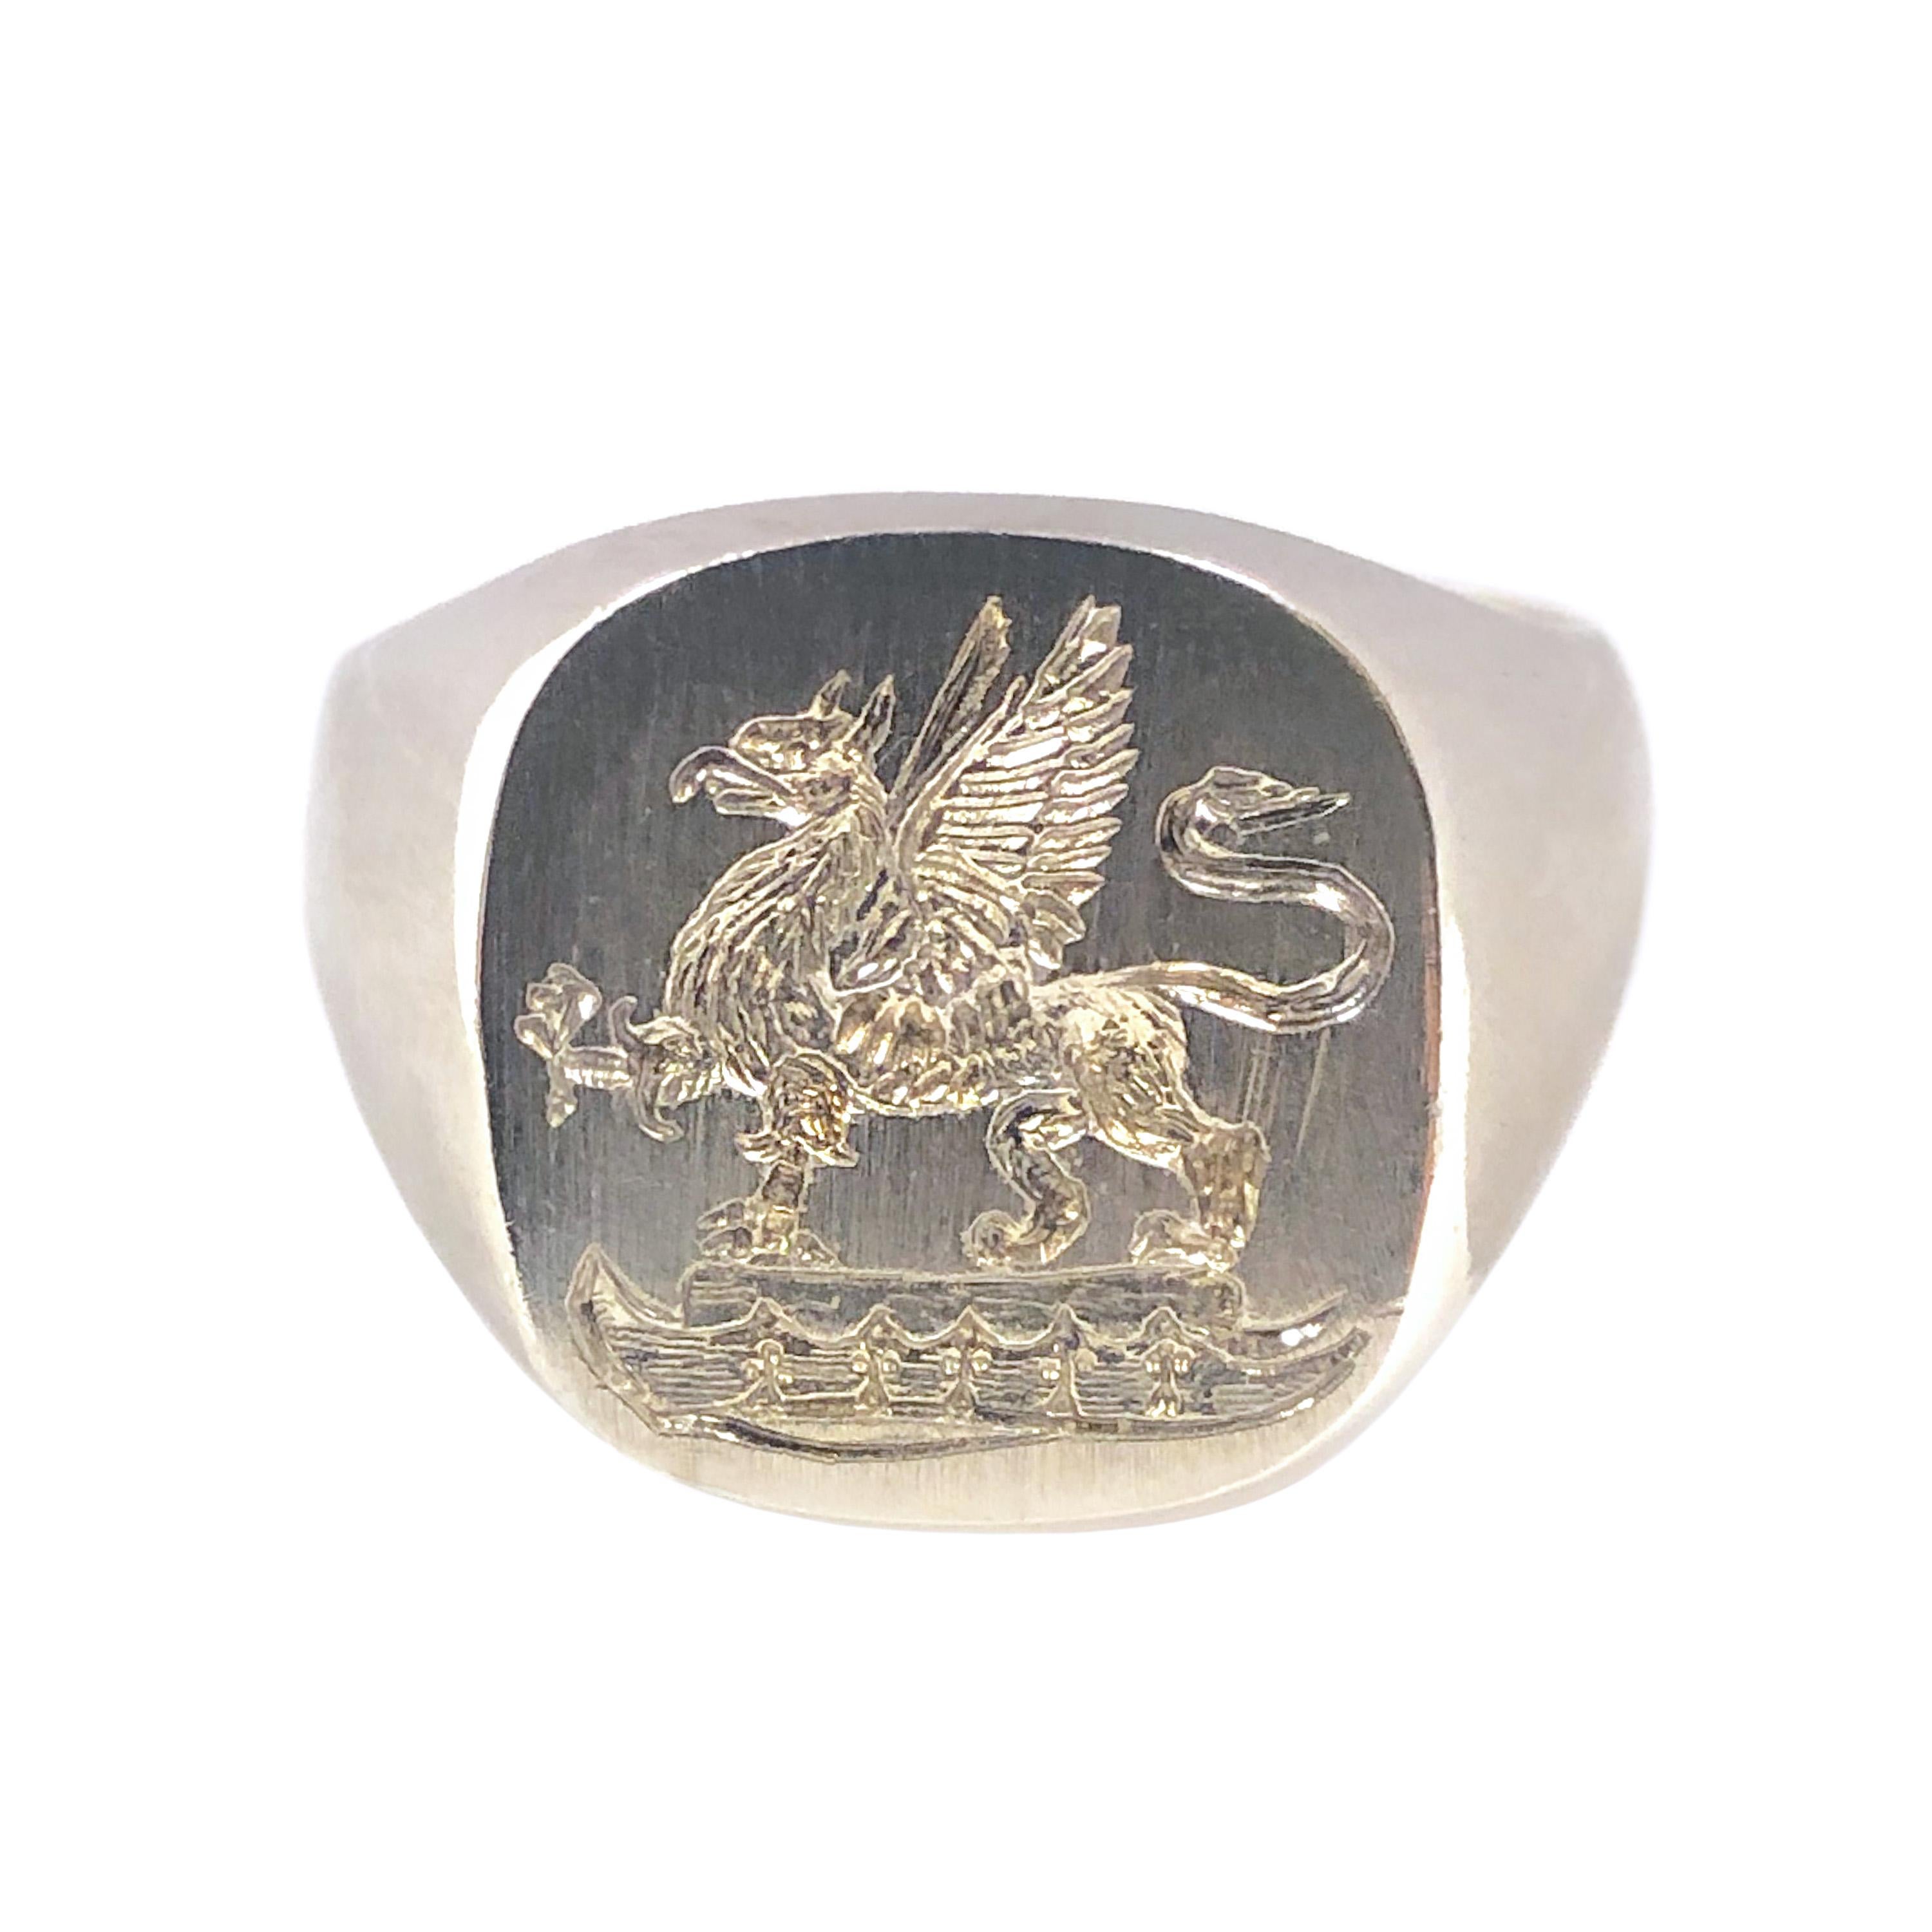 Circa 1920s Sterling Silver Signet Ring, the top measuring 5/8 X 1/2 inch and featuring a deeply carved Signet depiction of a Winged Griffin. Finger size 9.